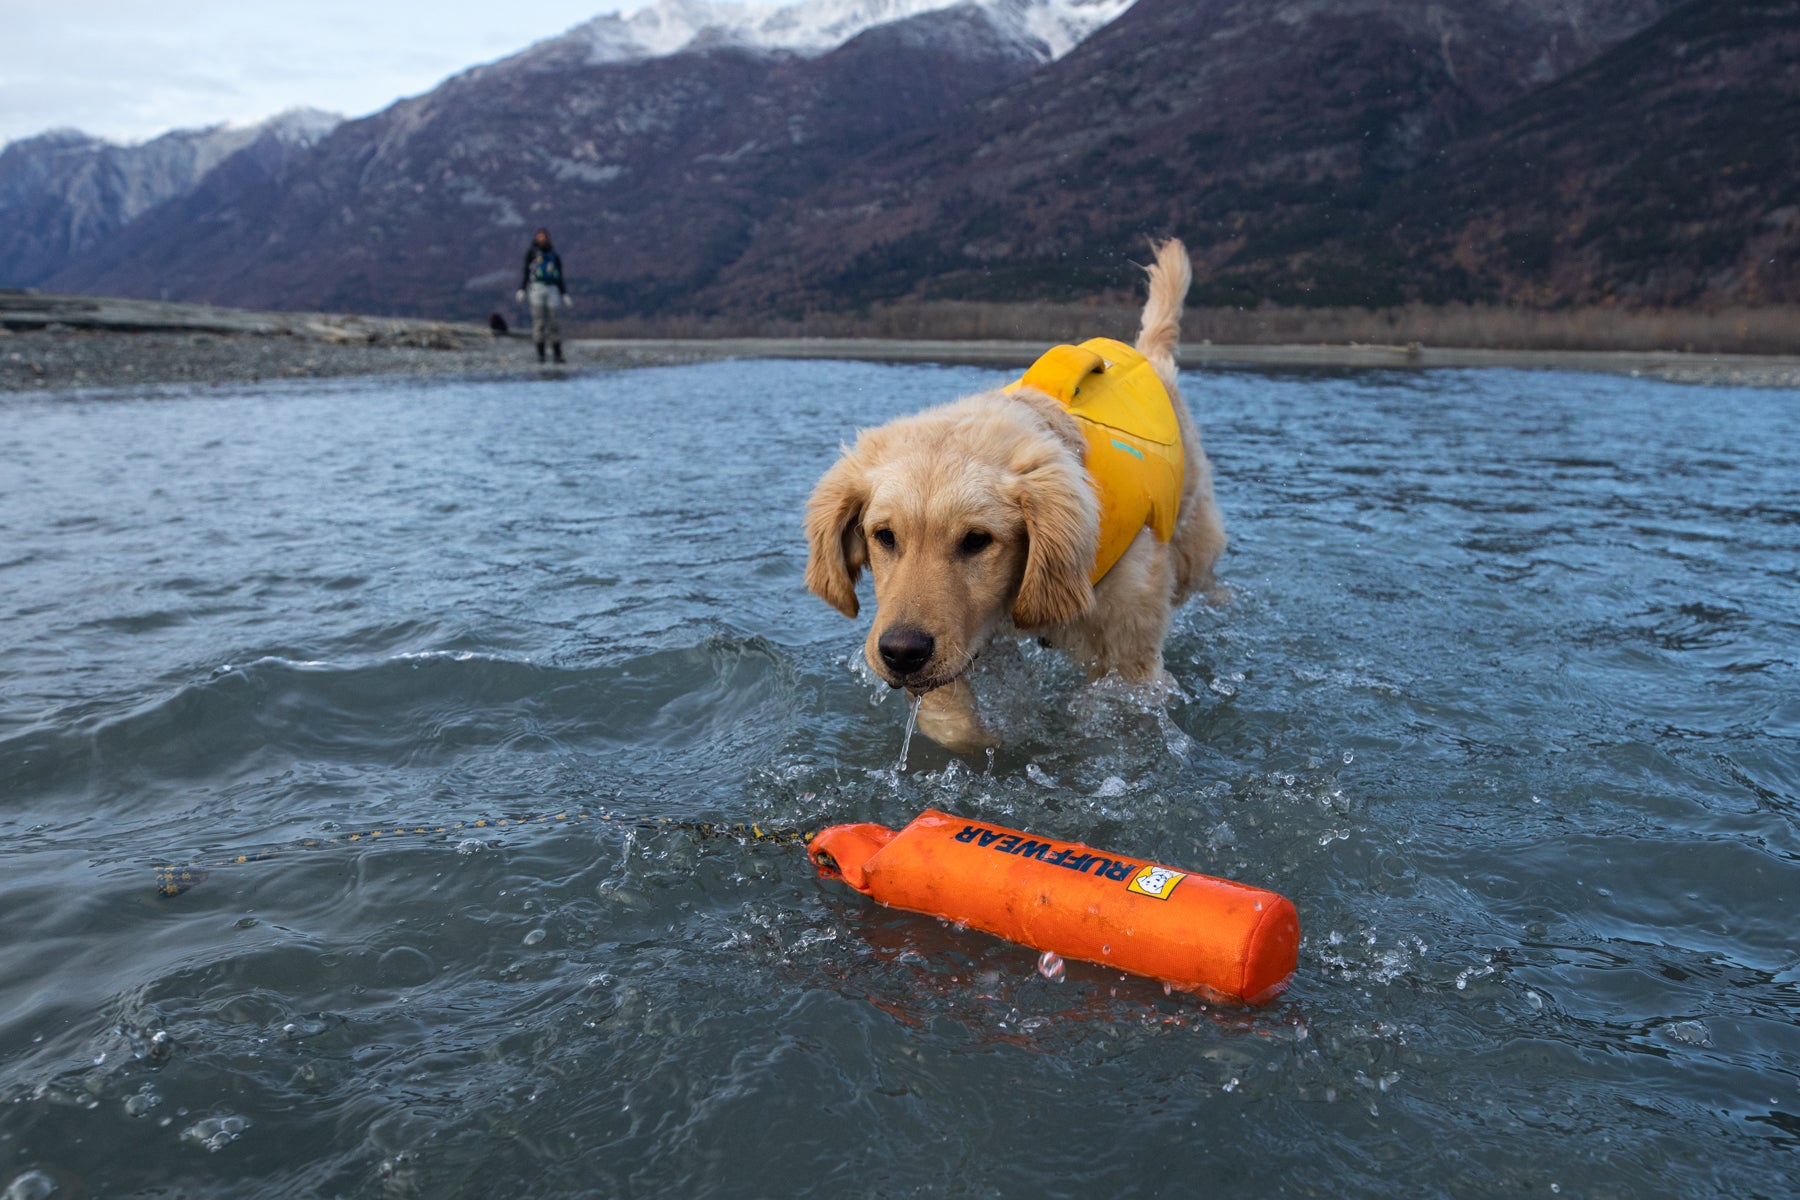 Sammy wades into the water to retrieve a Lunker Floating Throw Toy.